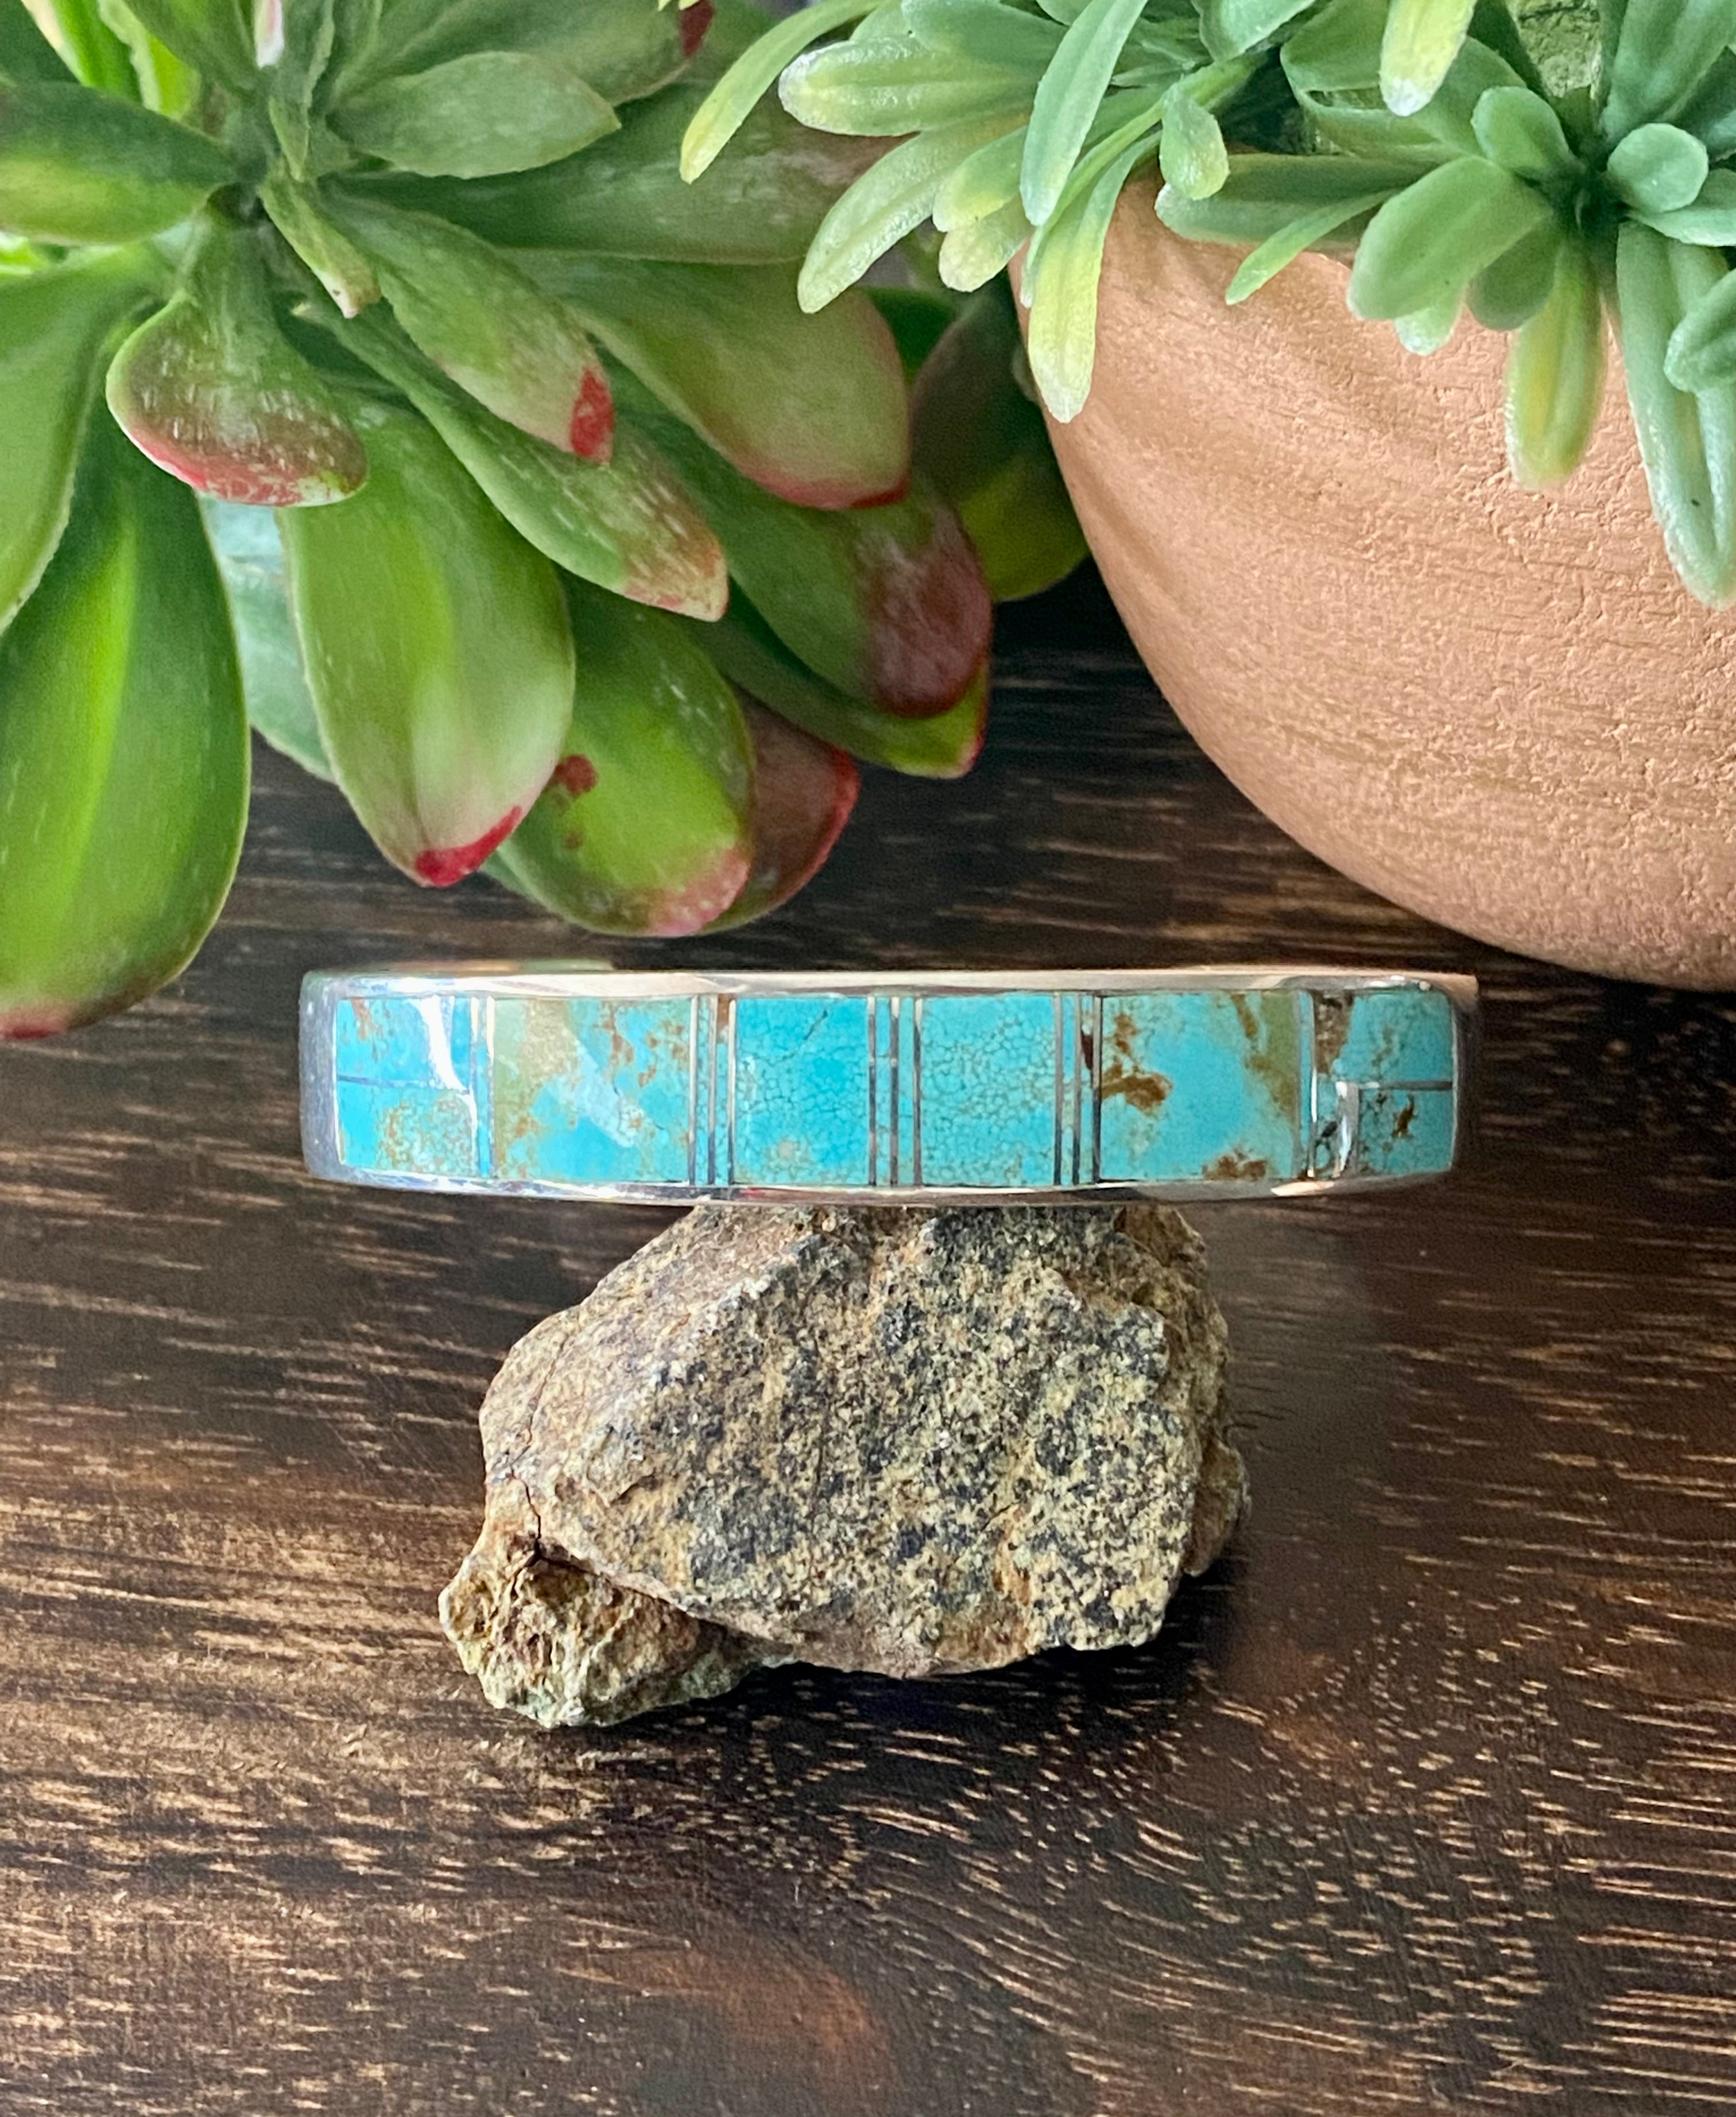 Navajo Made #8 Turquoise & Sterling Silver Inlay Cuff Bracelet